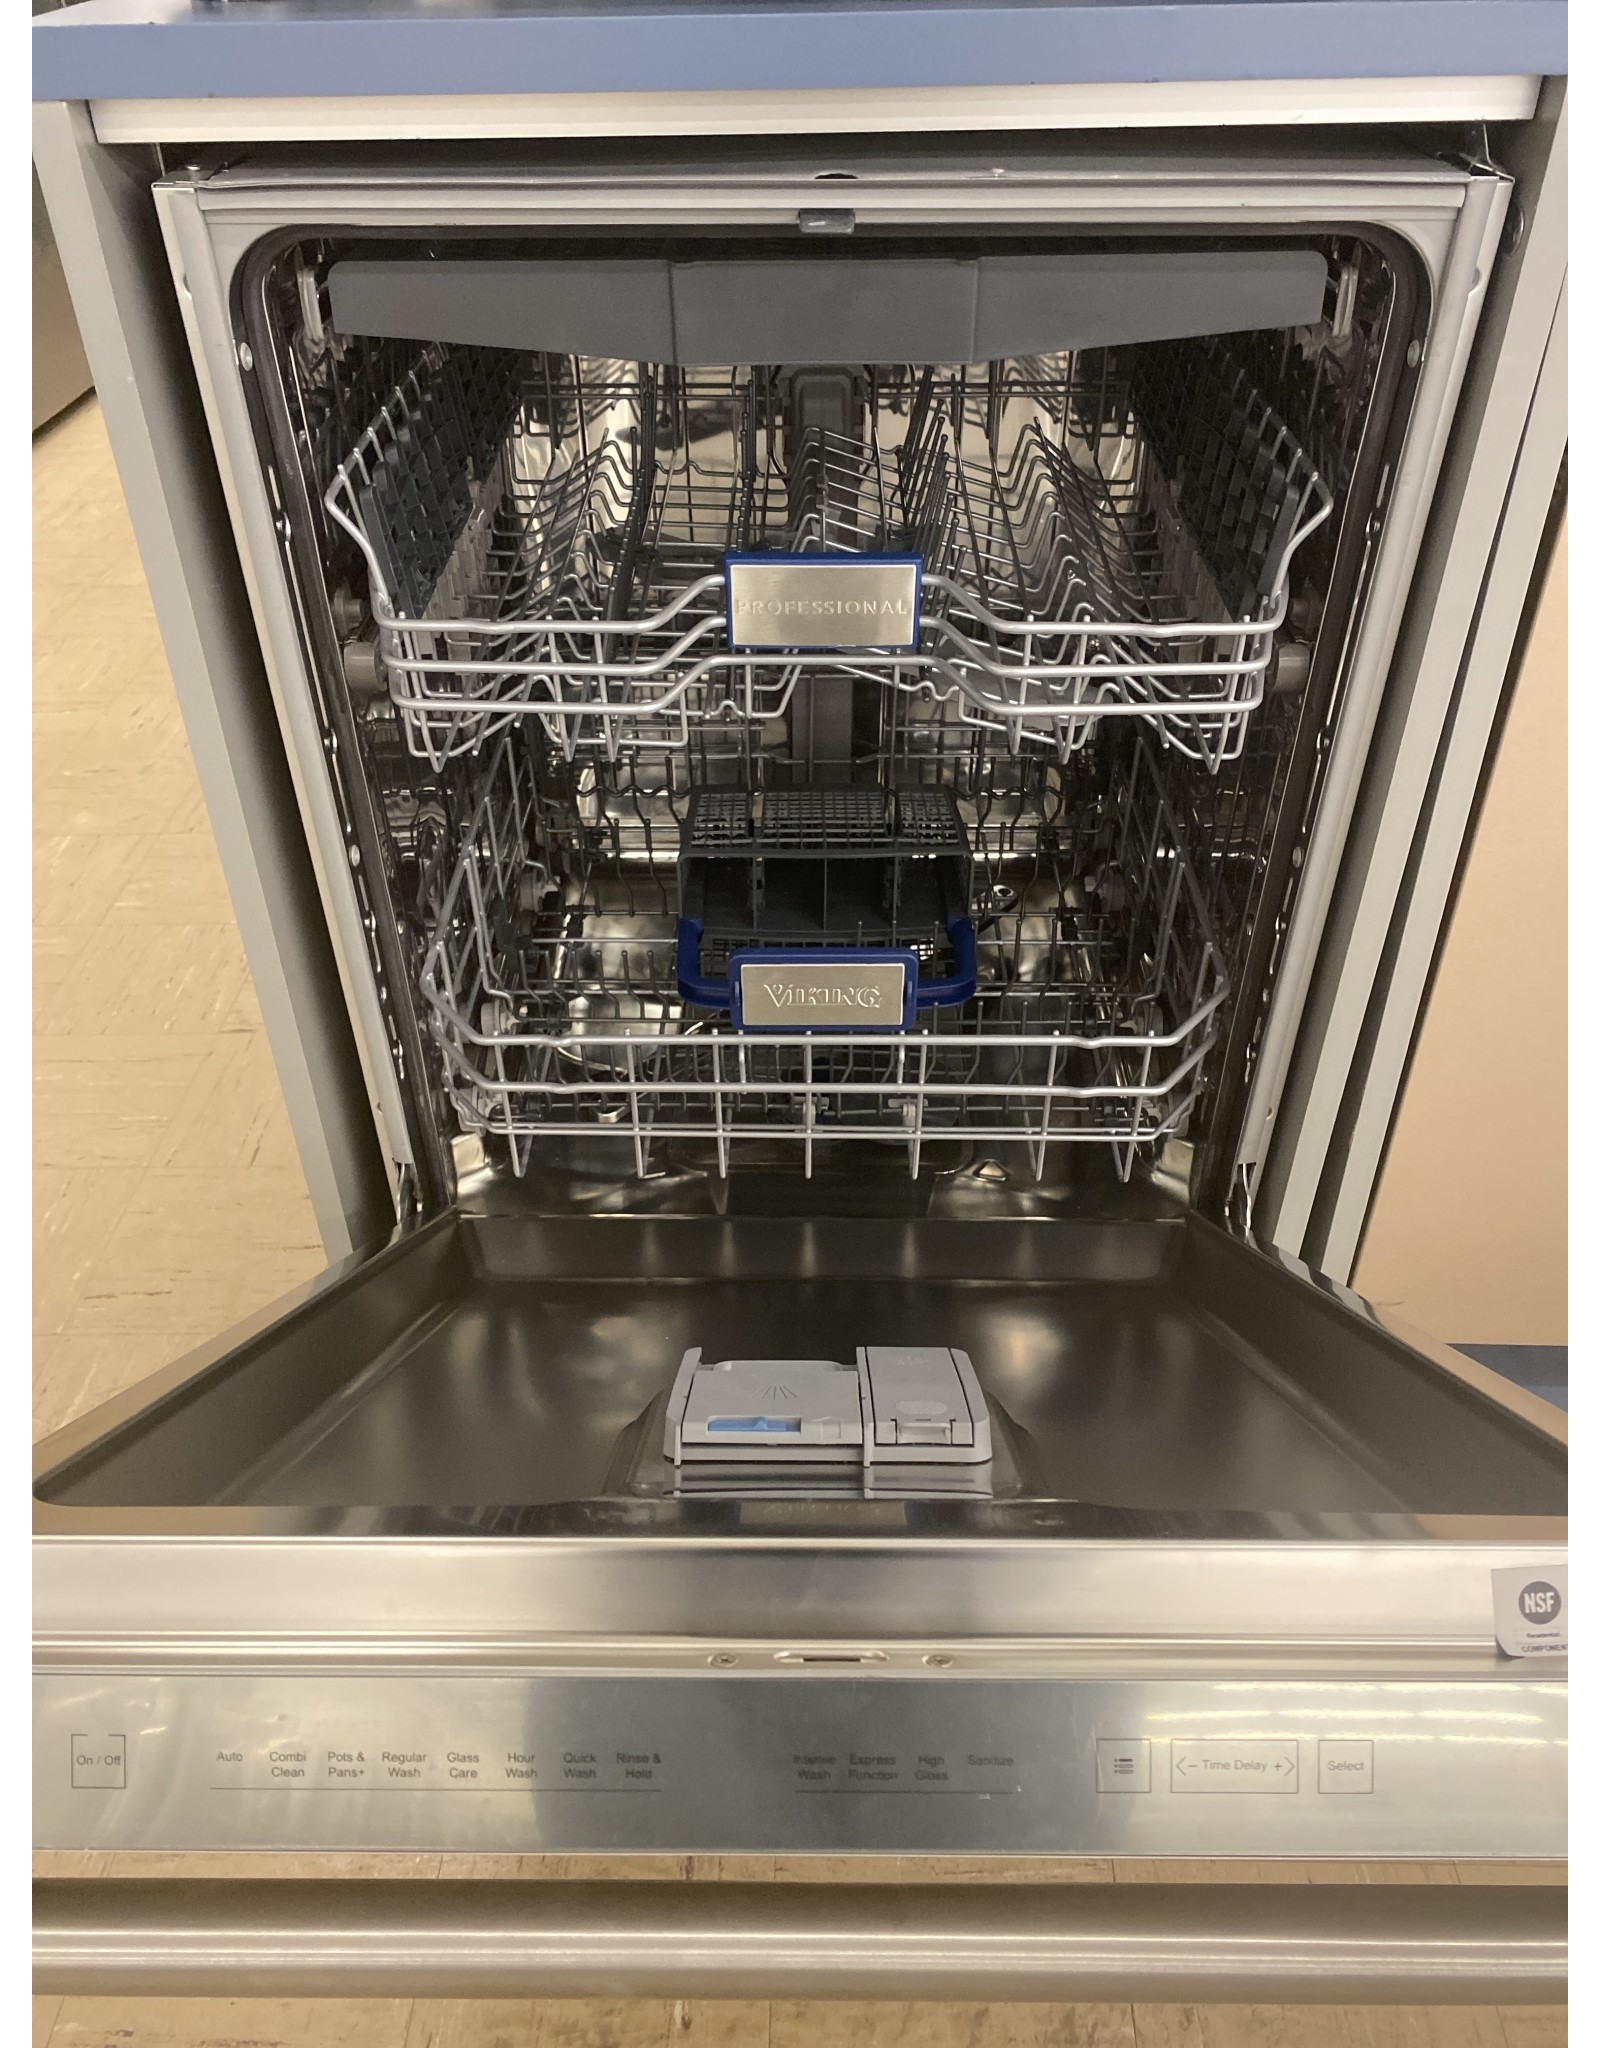 viking VDWU524SS 24" Built-In Dishwasher with Stainless Steel Tub